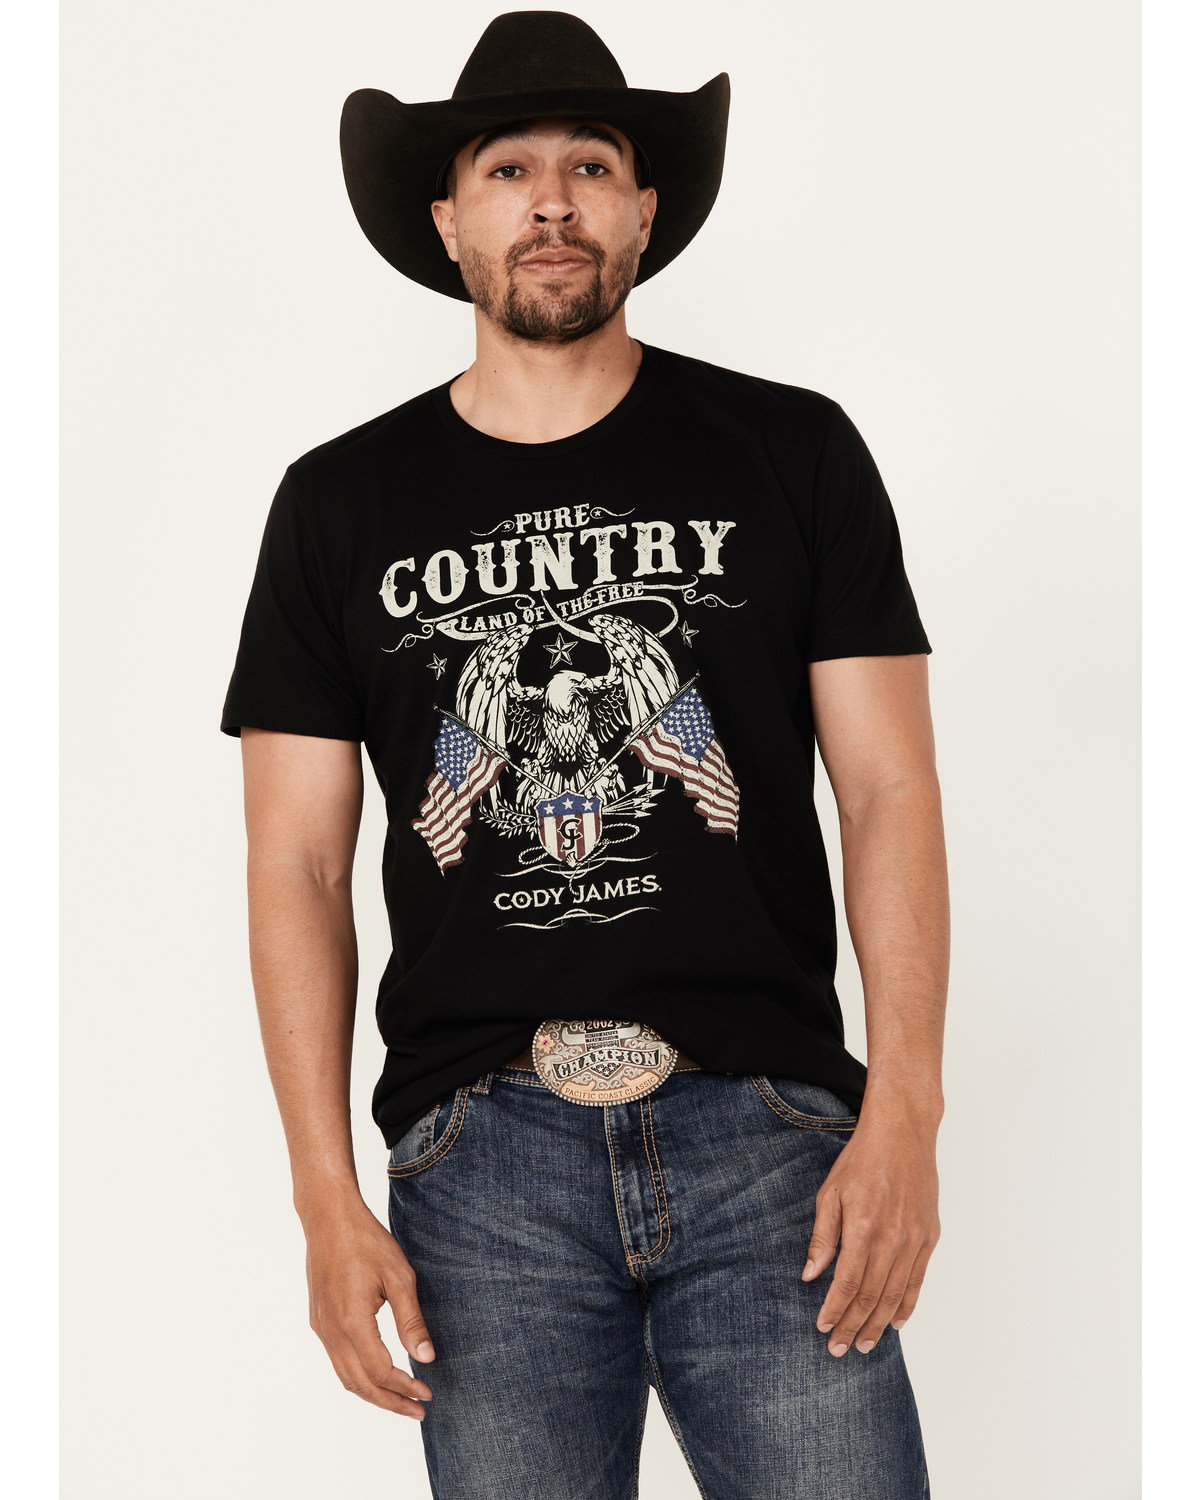 Cody James Men's Pure Country Short Sleeve Graphic T-Shirt